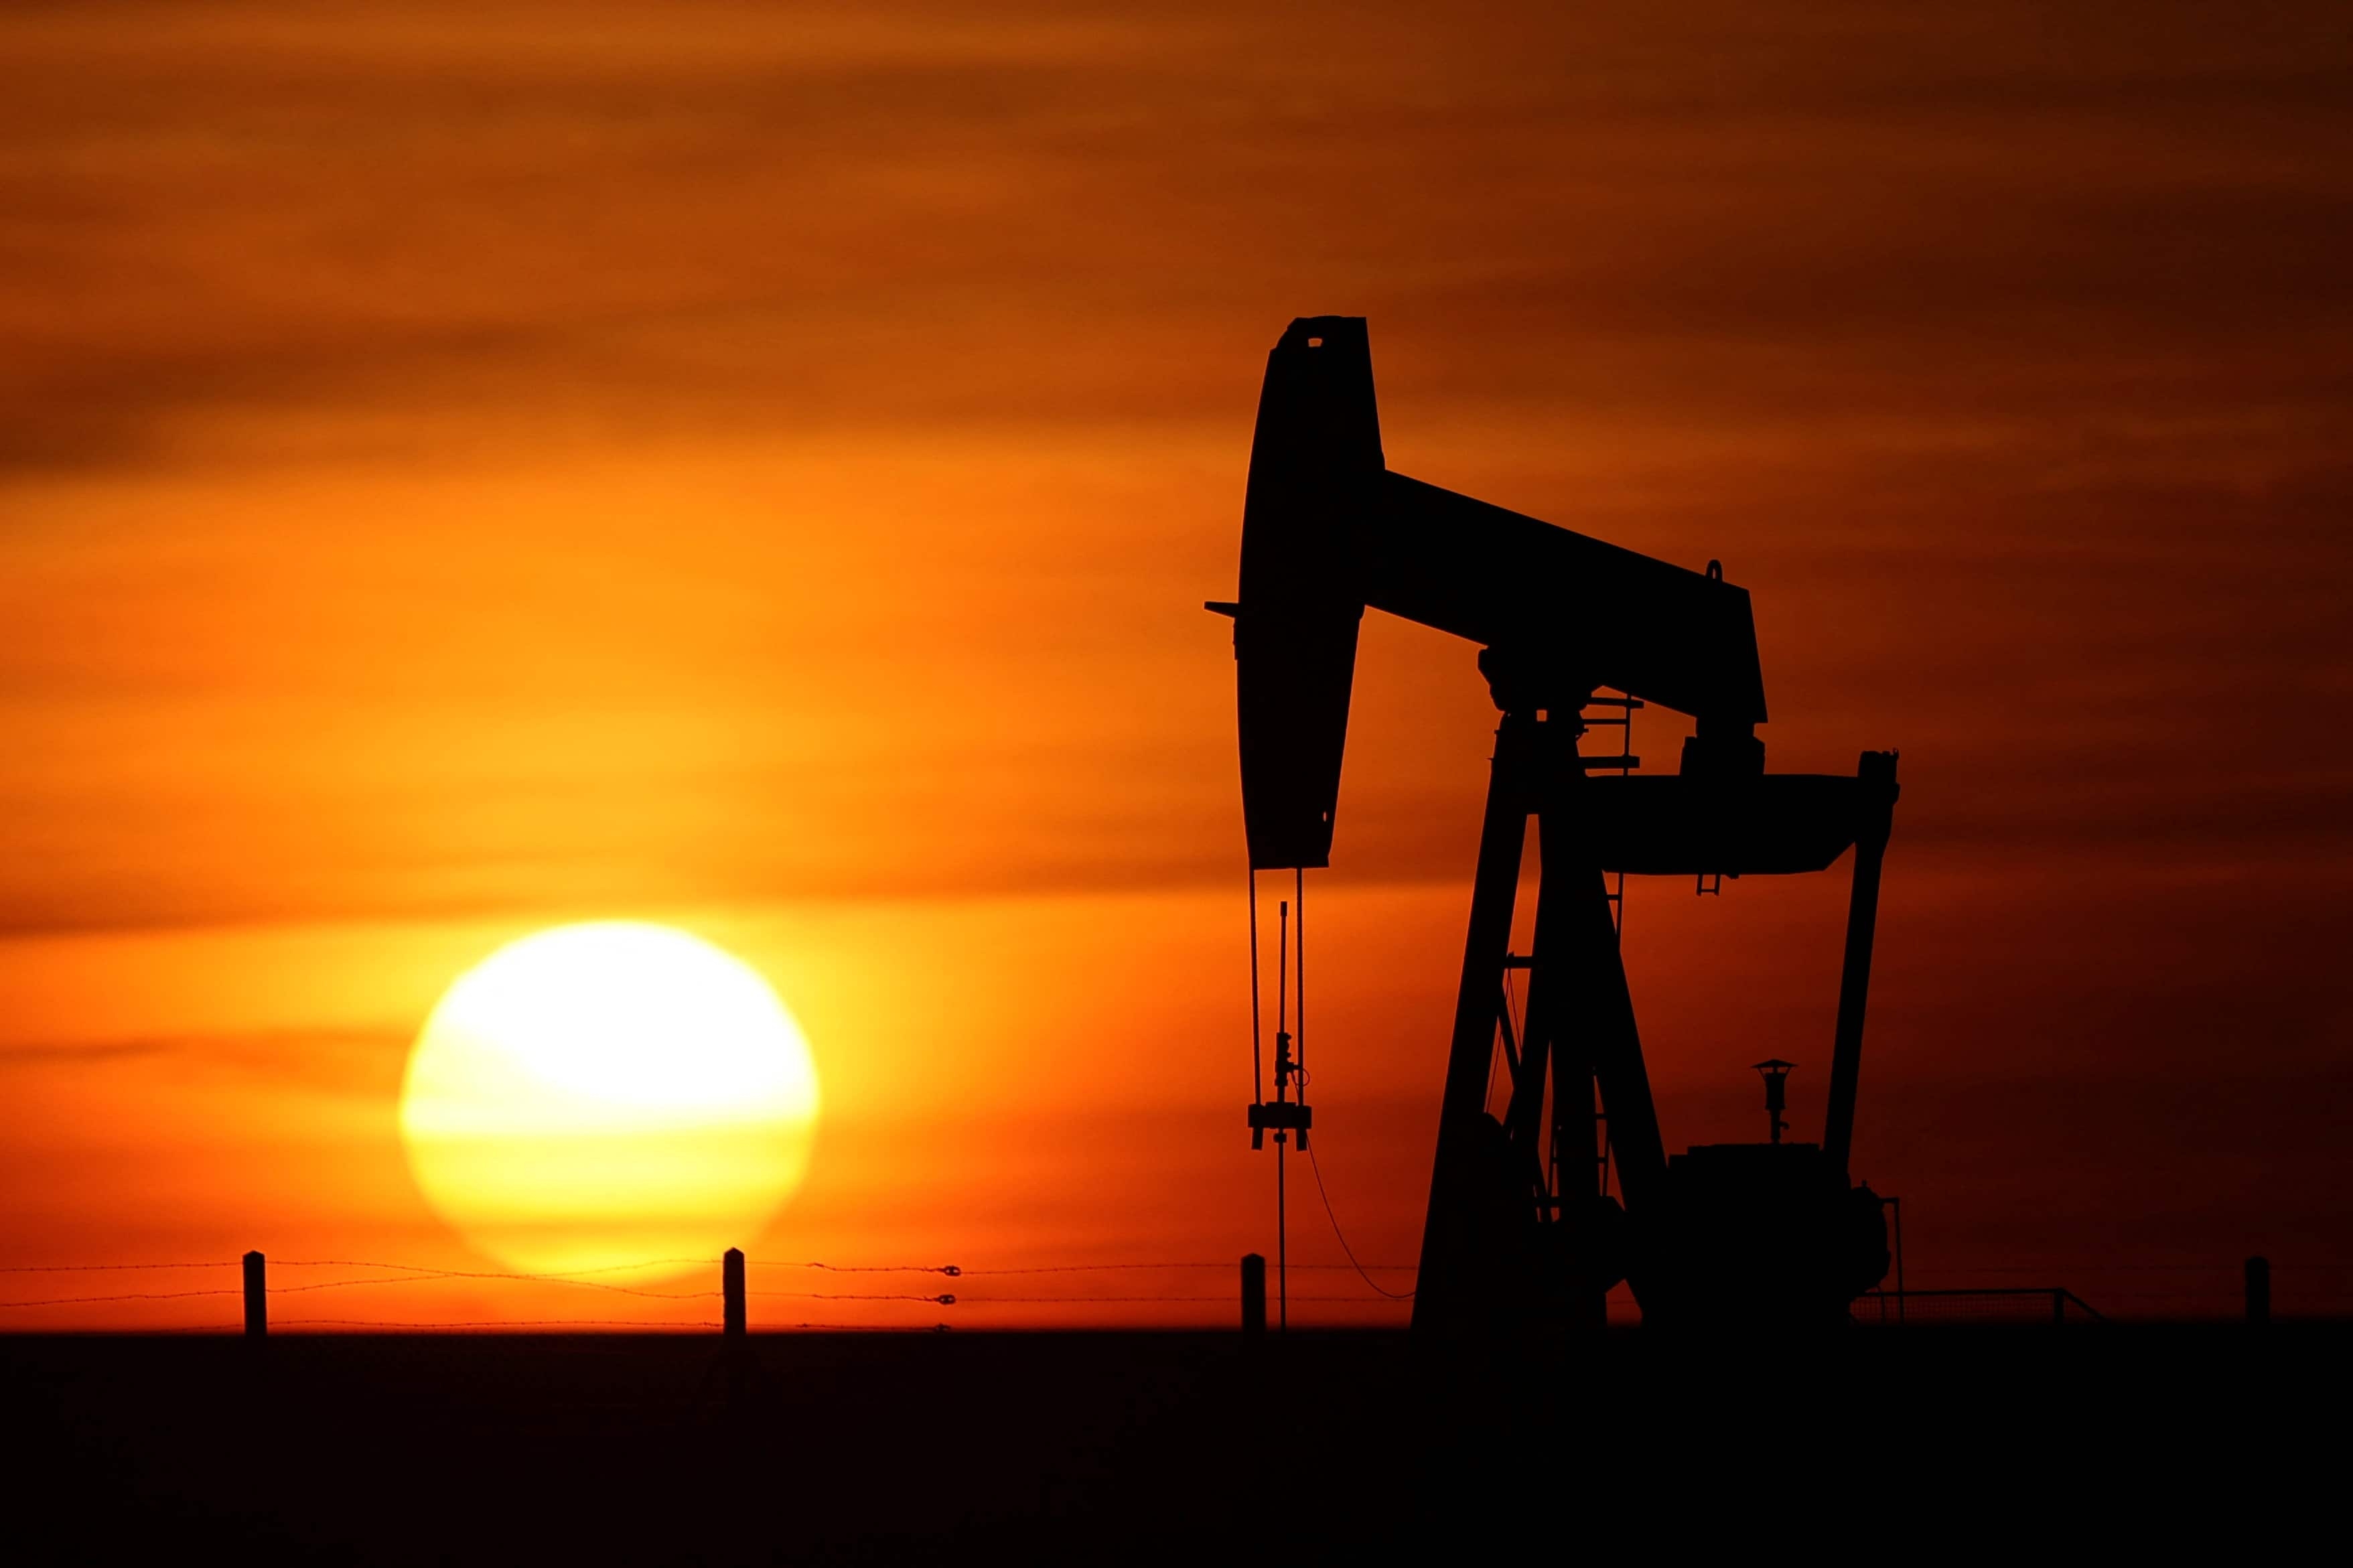 Investors continued to monitor moves in the oil markets on Tuesday, with prices dipping in the morning of Asia trading hours. International benchmark Brent crude futures slipped 0.52 percent to $122.57 per barrel. U.S. crude futures shed 0.72 percent to $118.54 per barrel.